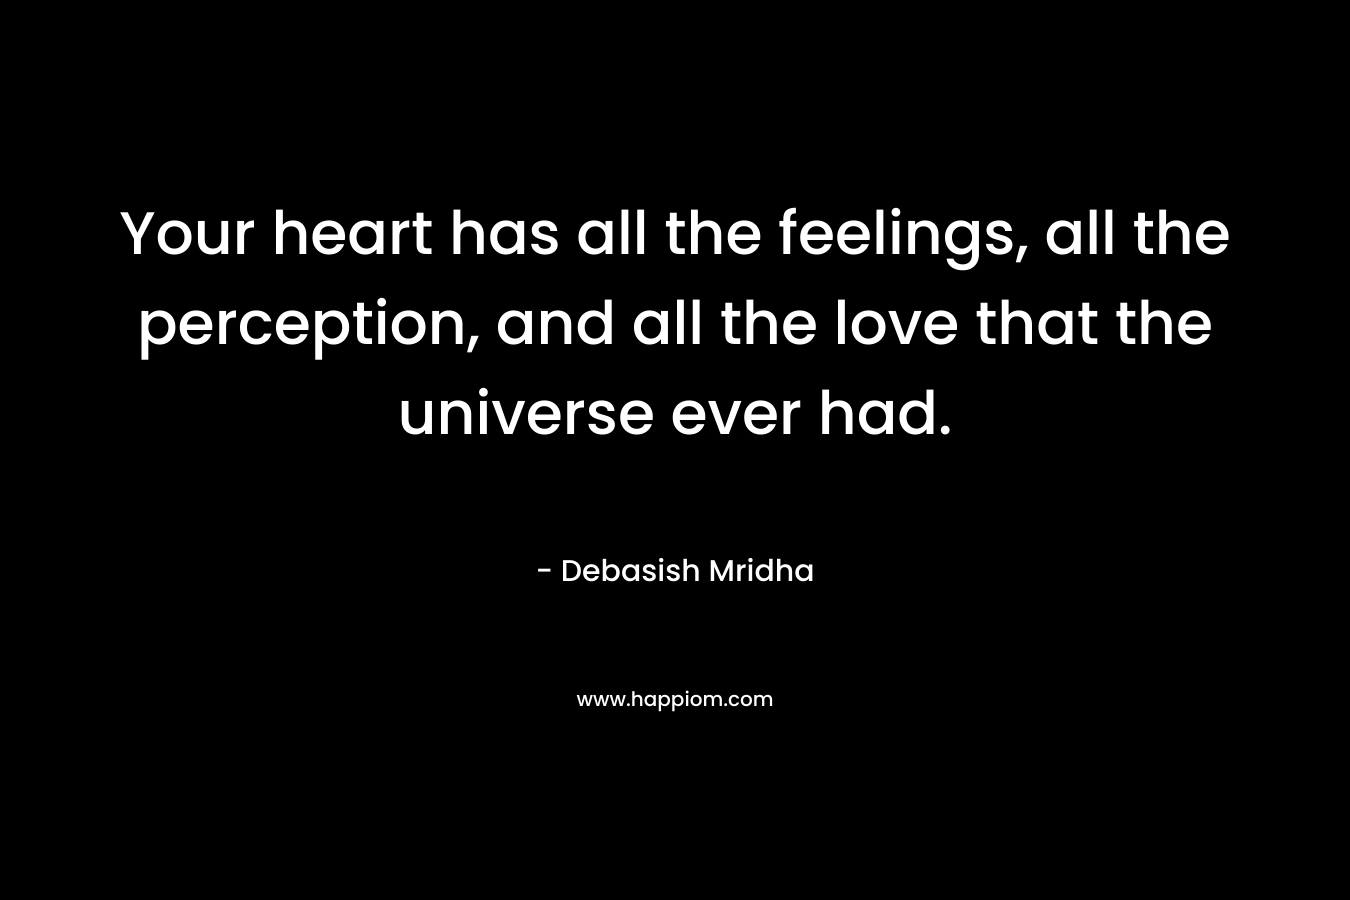 Your heart has all the feelings, all the perception, and all the love that the universe ever had.